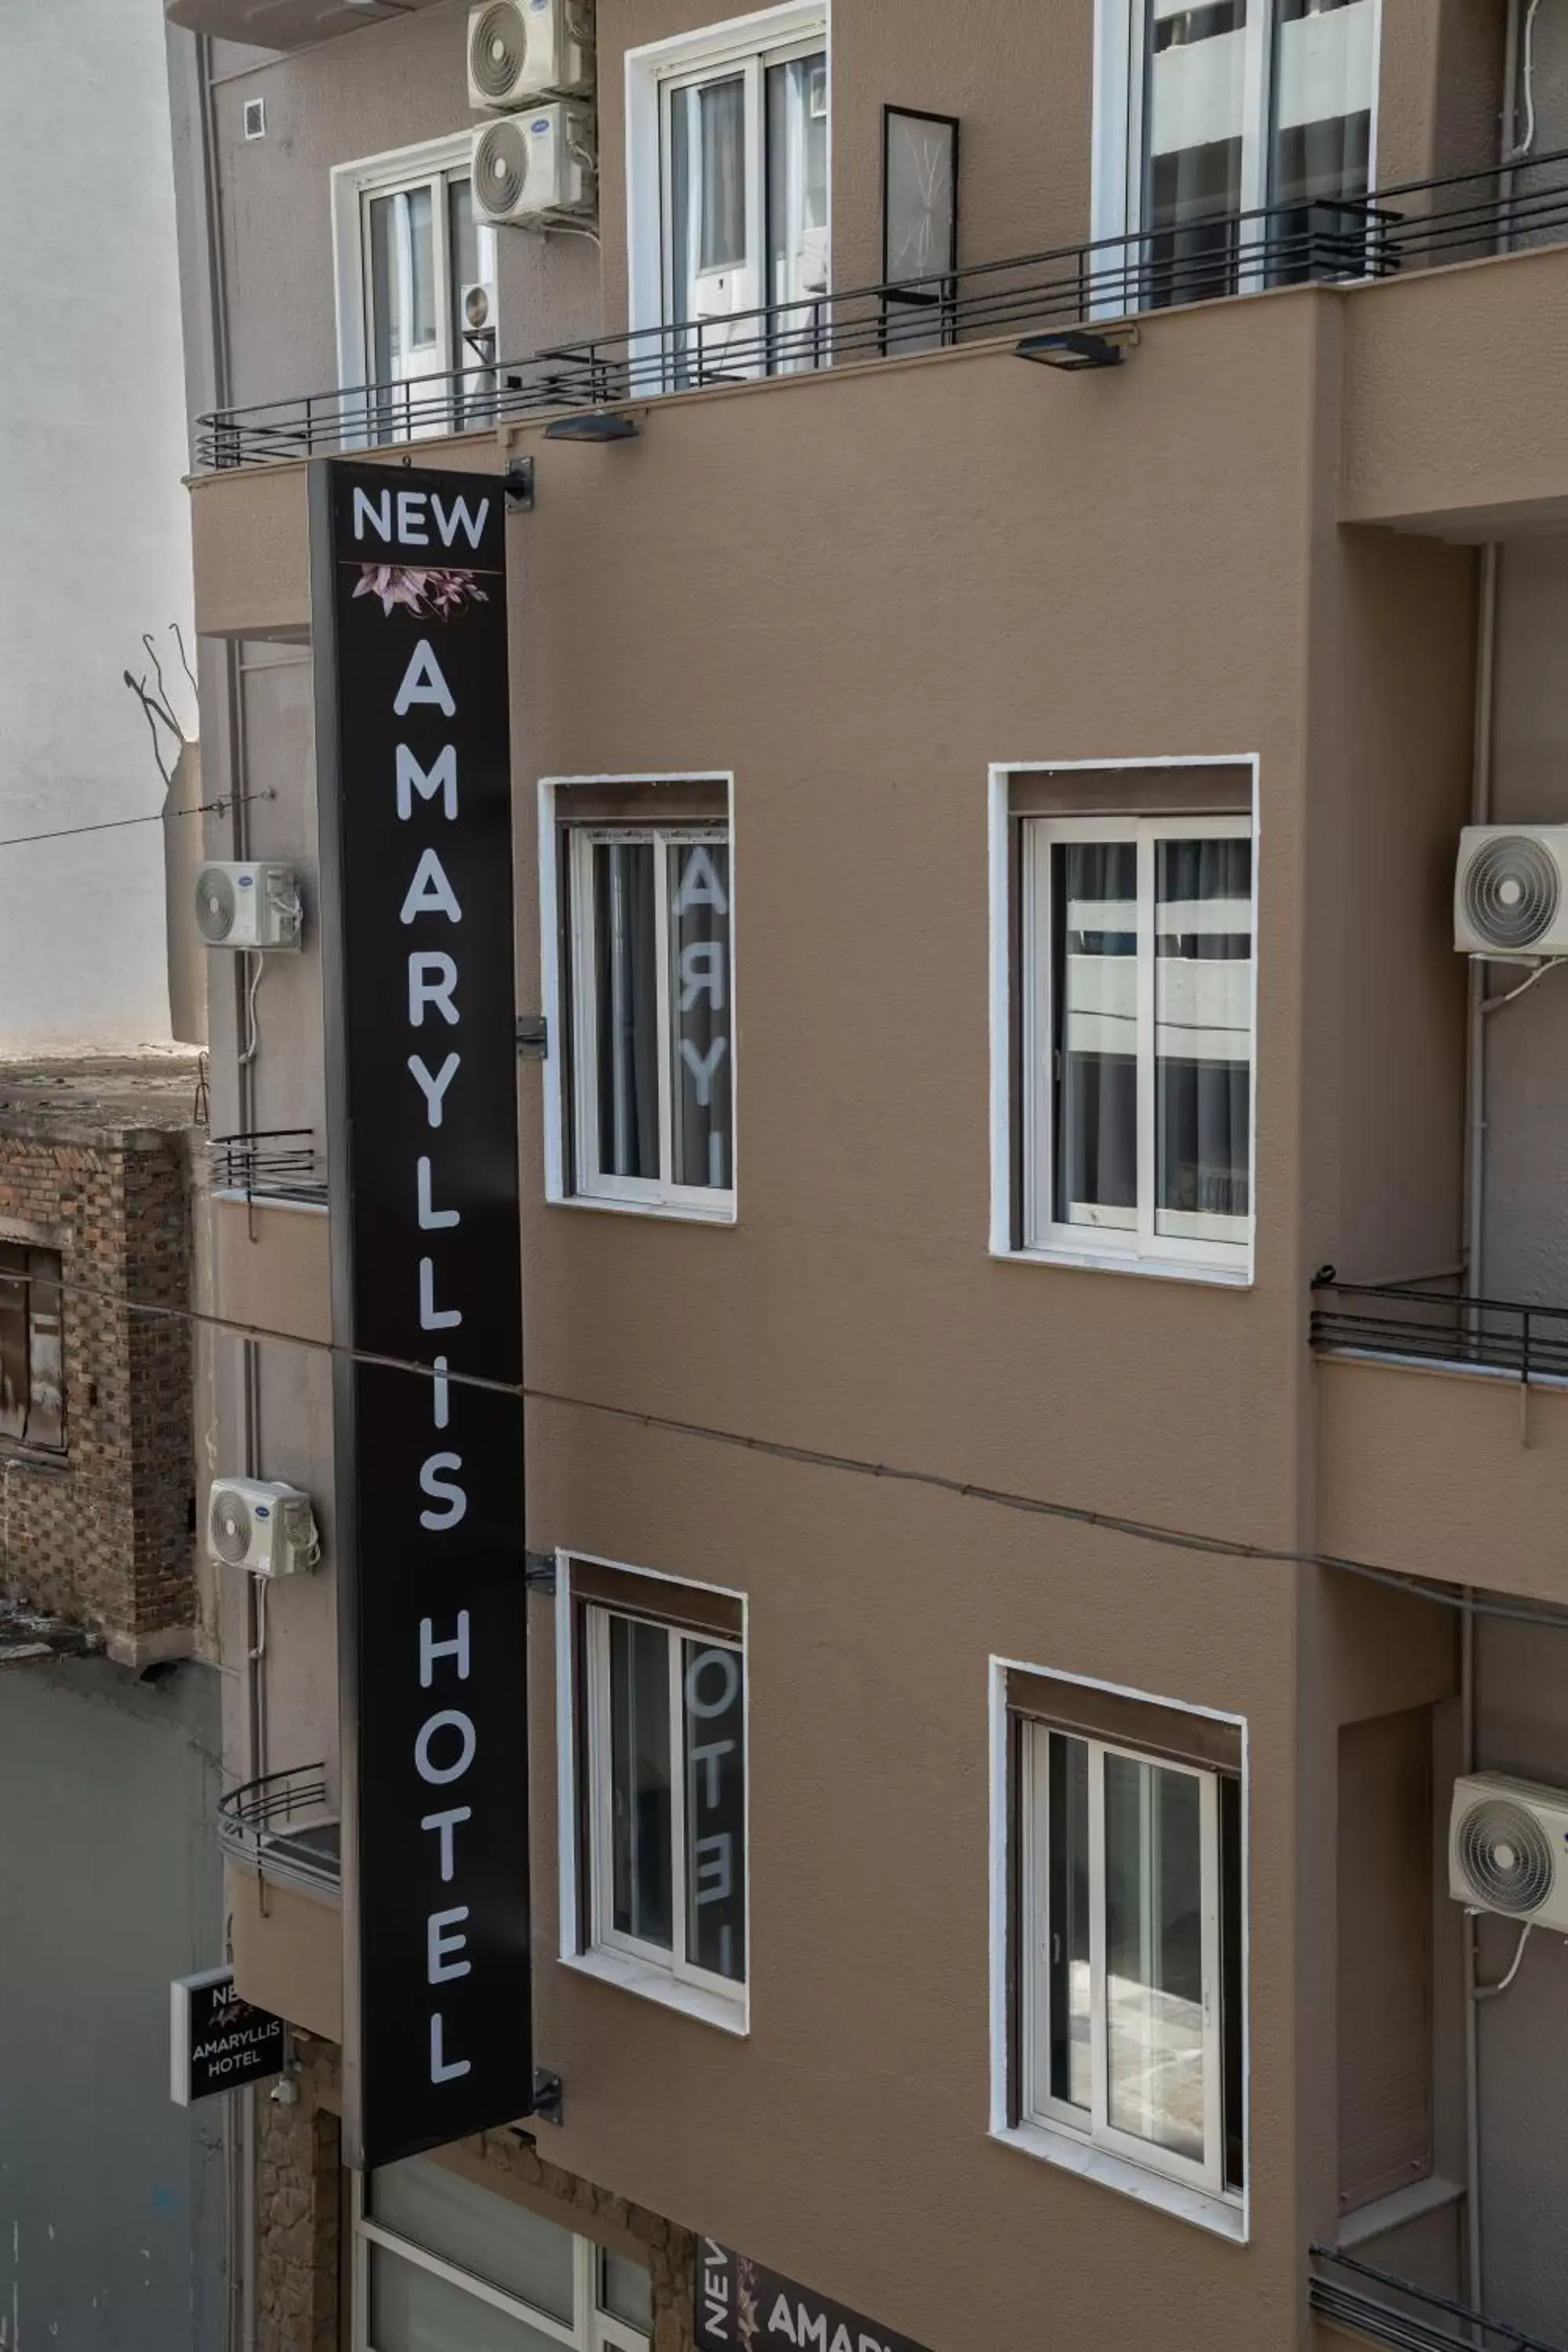 Property Building in New Amaryllis Hotel